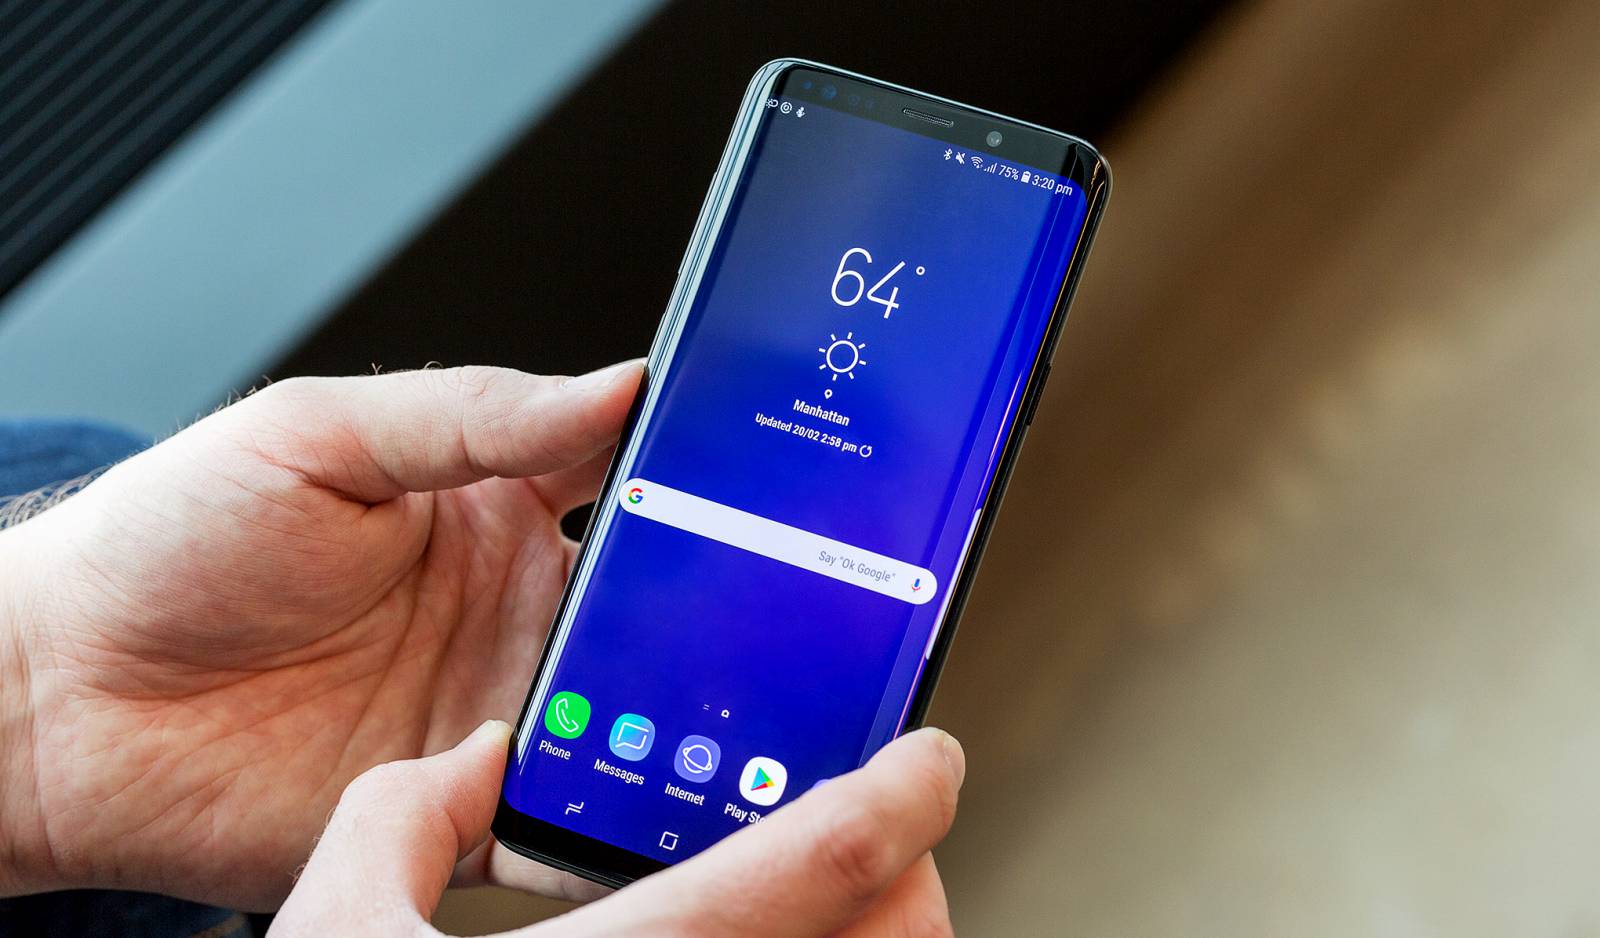 GALAXY S9 DISCOUNTS at eMAG, Prices 2000 LEI LOWER